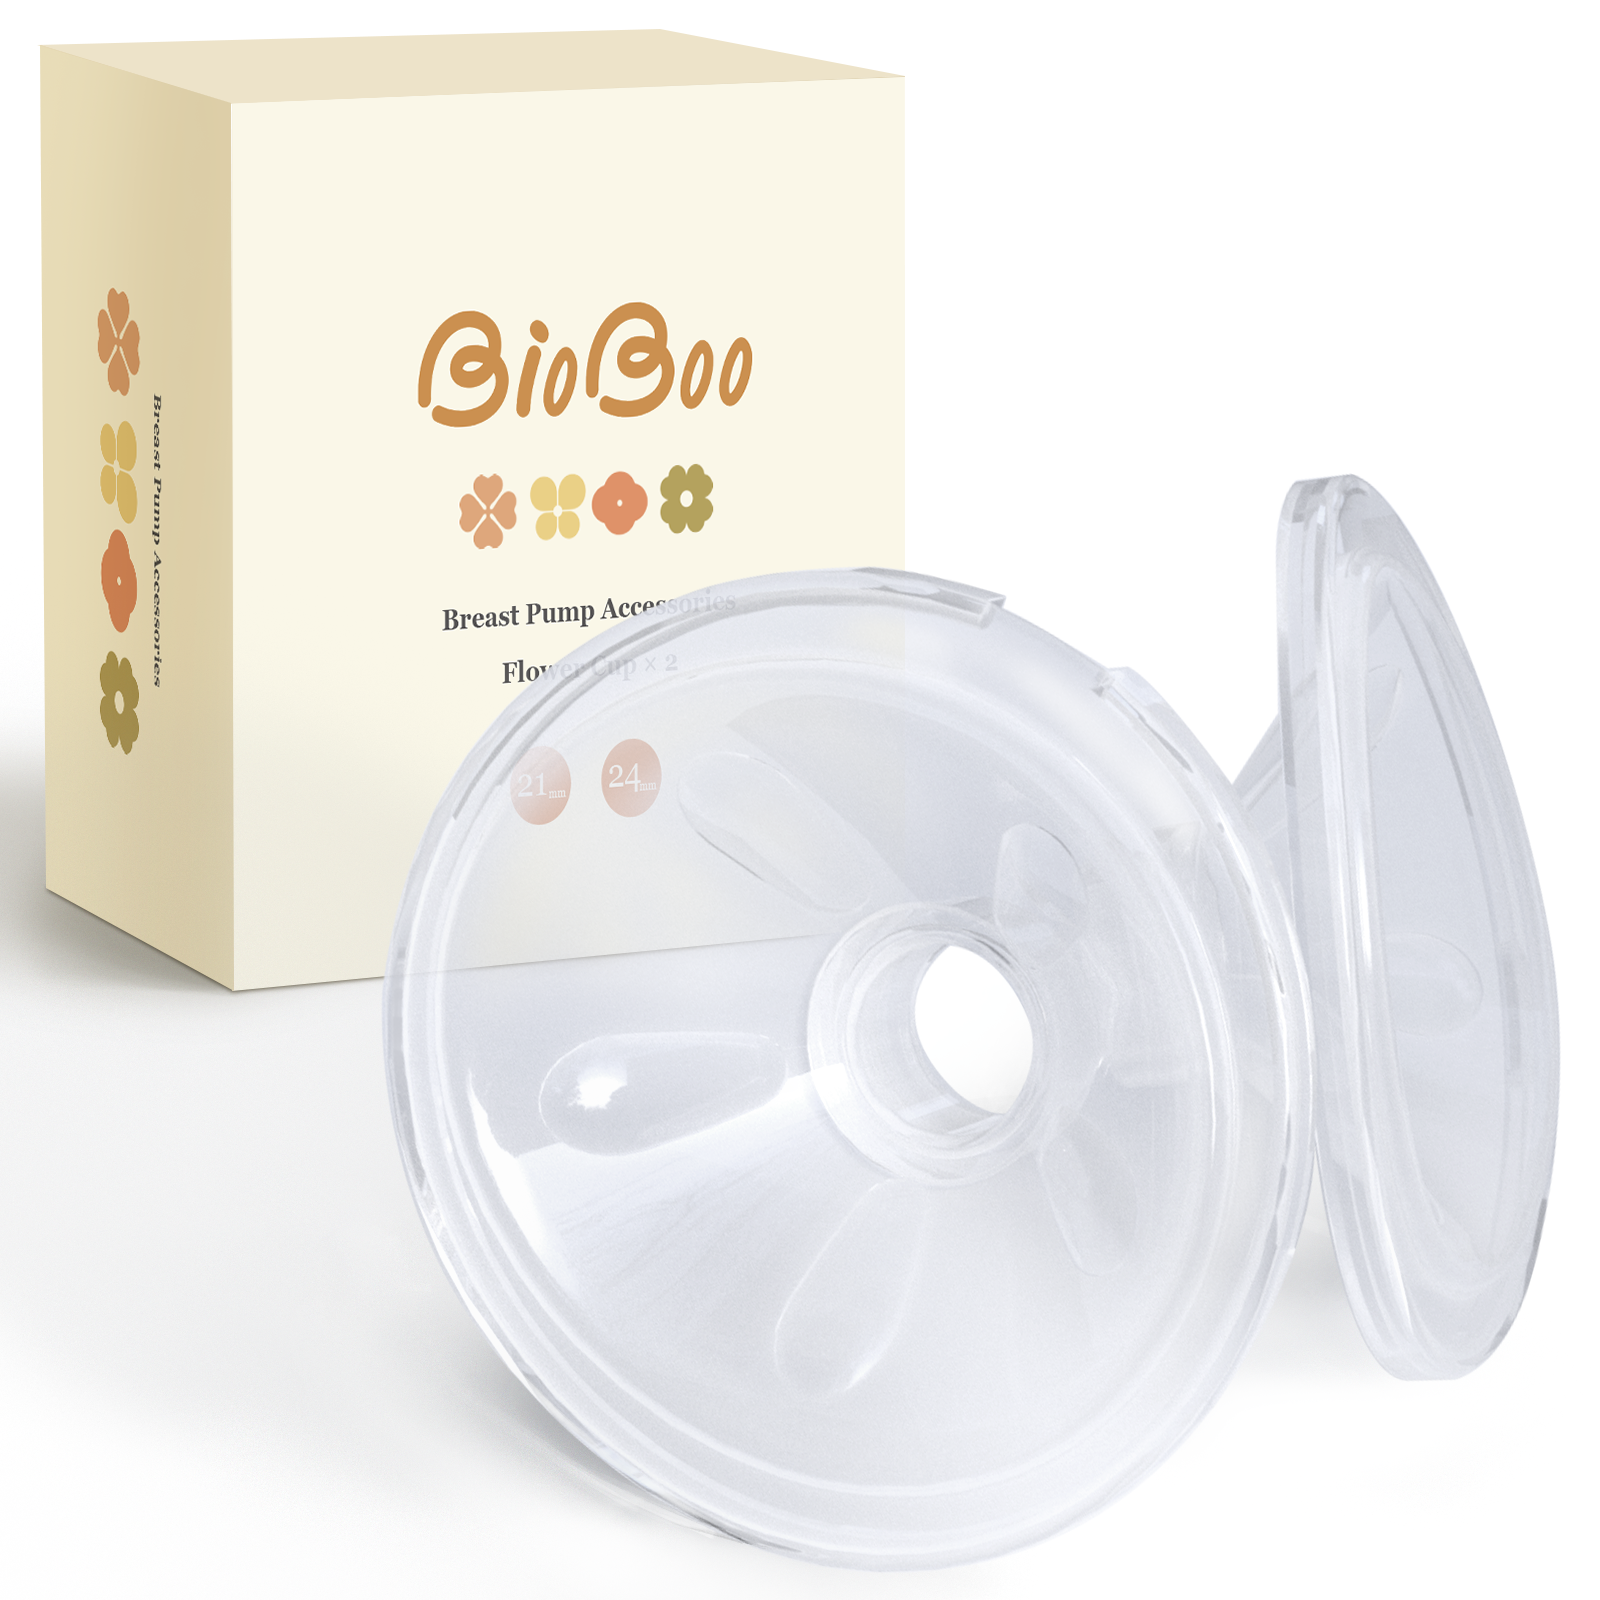 BIOBOO Breast Pump Replacement Parts-- Flower cup